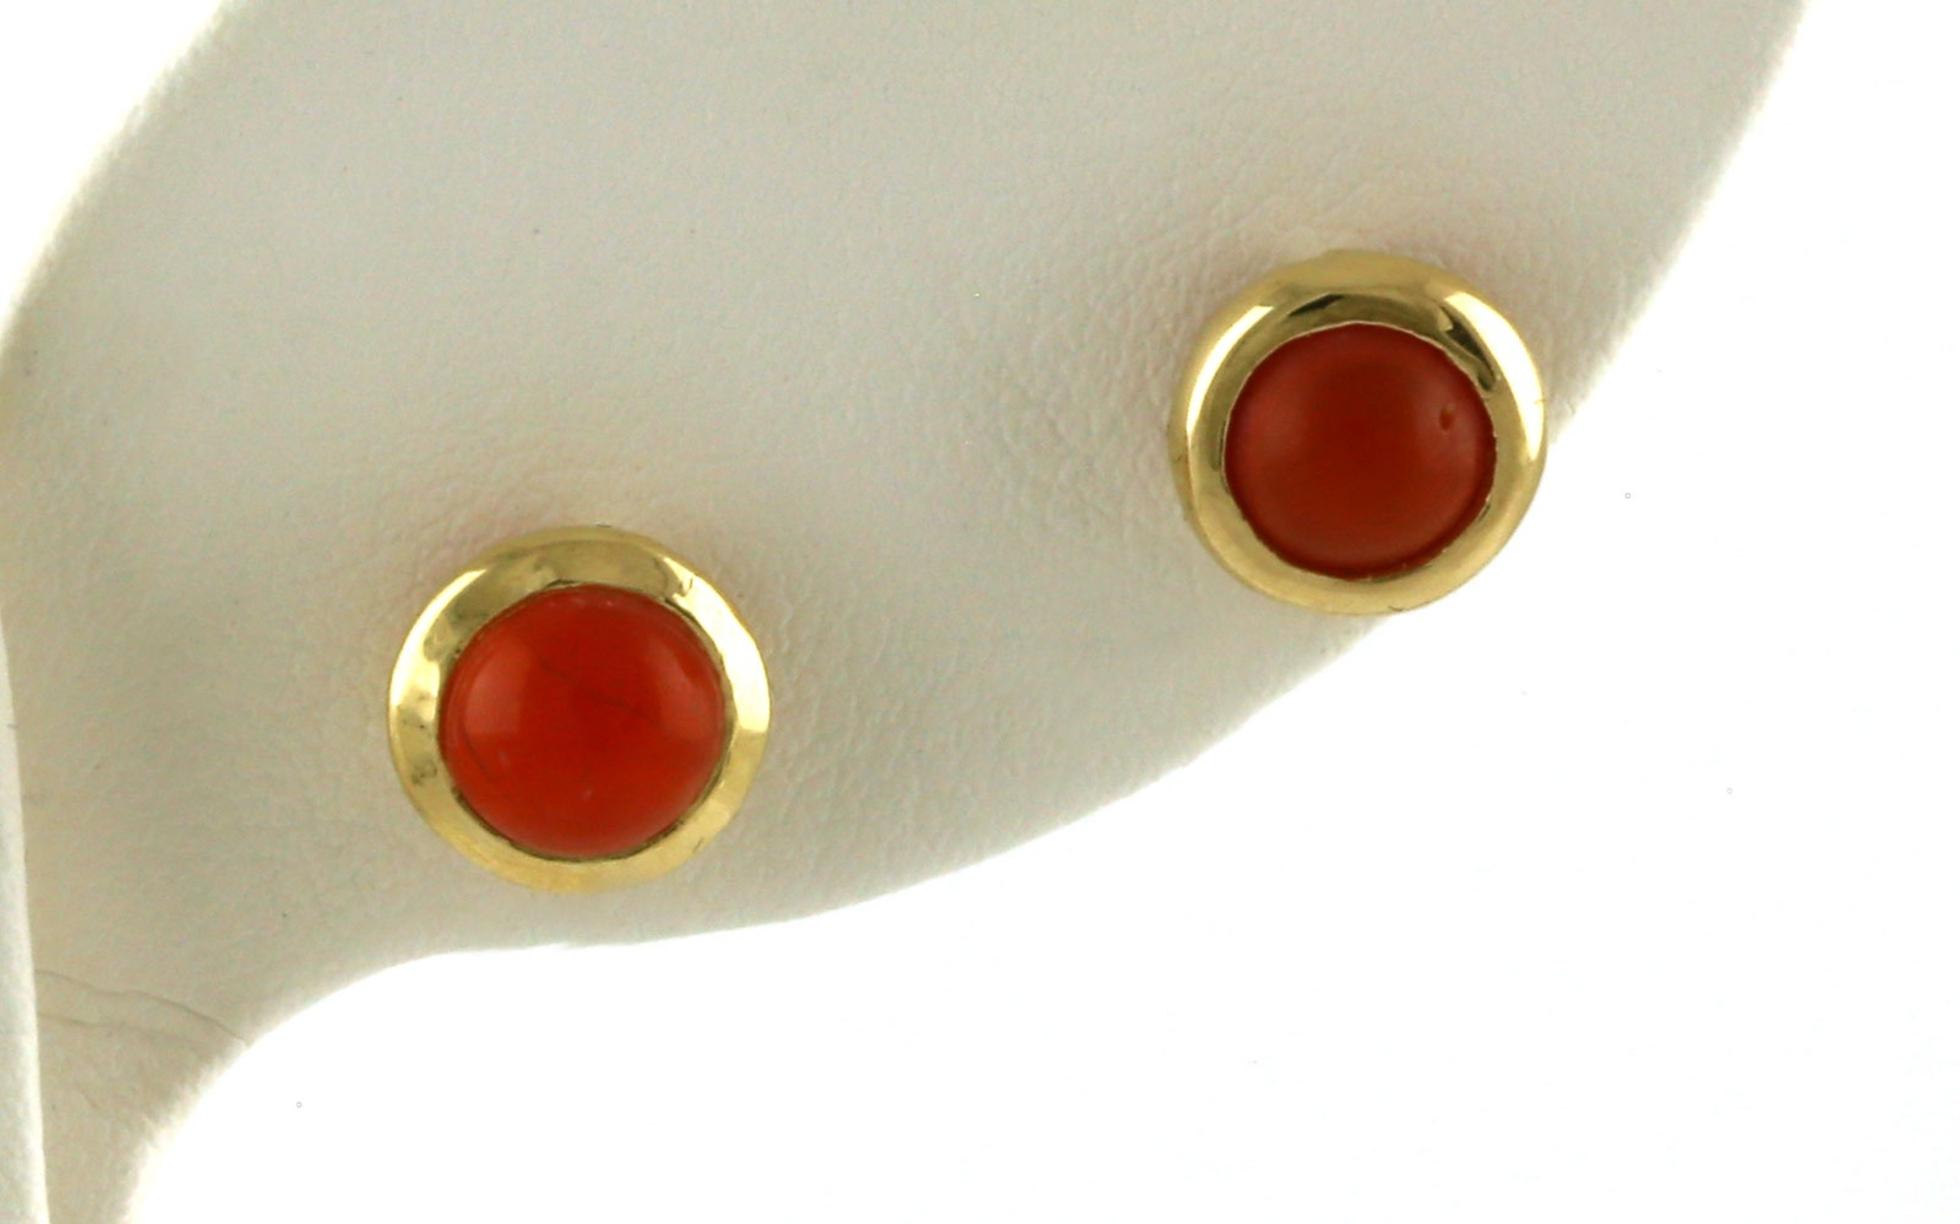 Estate Piece: Bezel-set Cabochon-cut Coral Stud Earrings in Yellow Gold